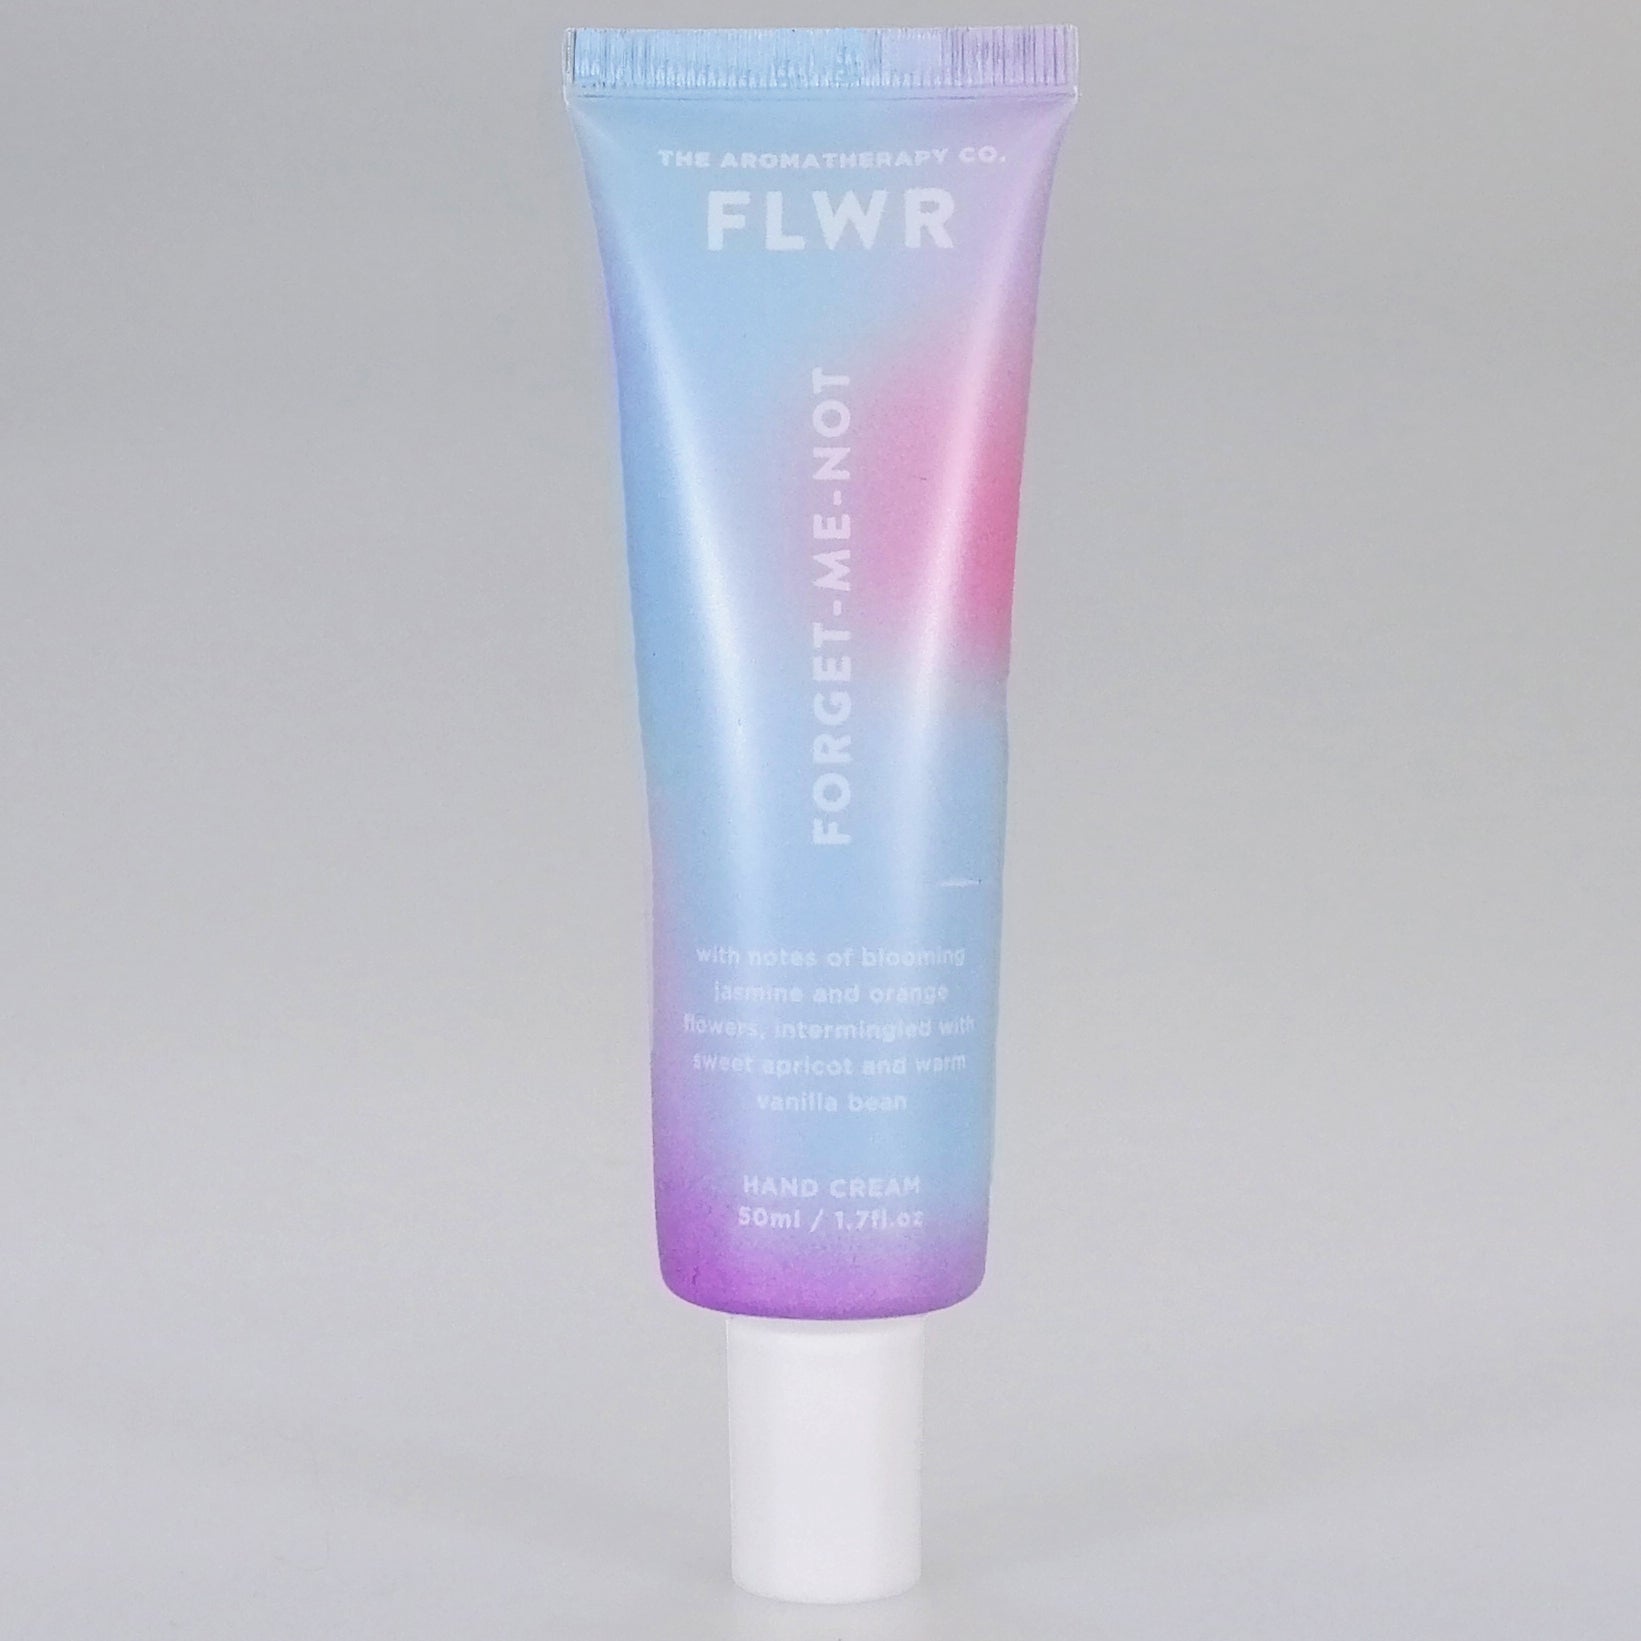 The Aromatherapy Co. FLWR Hand Cream - Forget-Me-Not